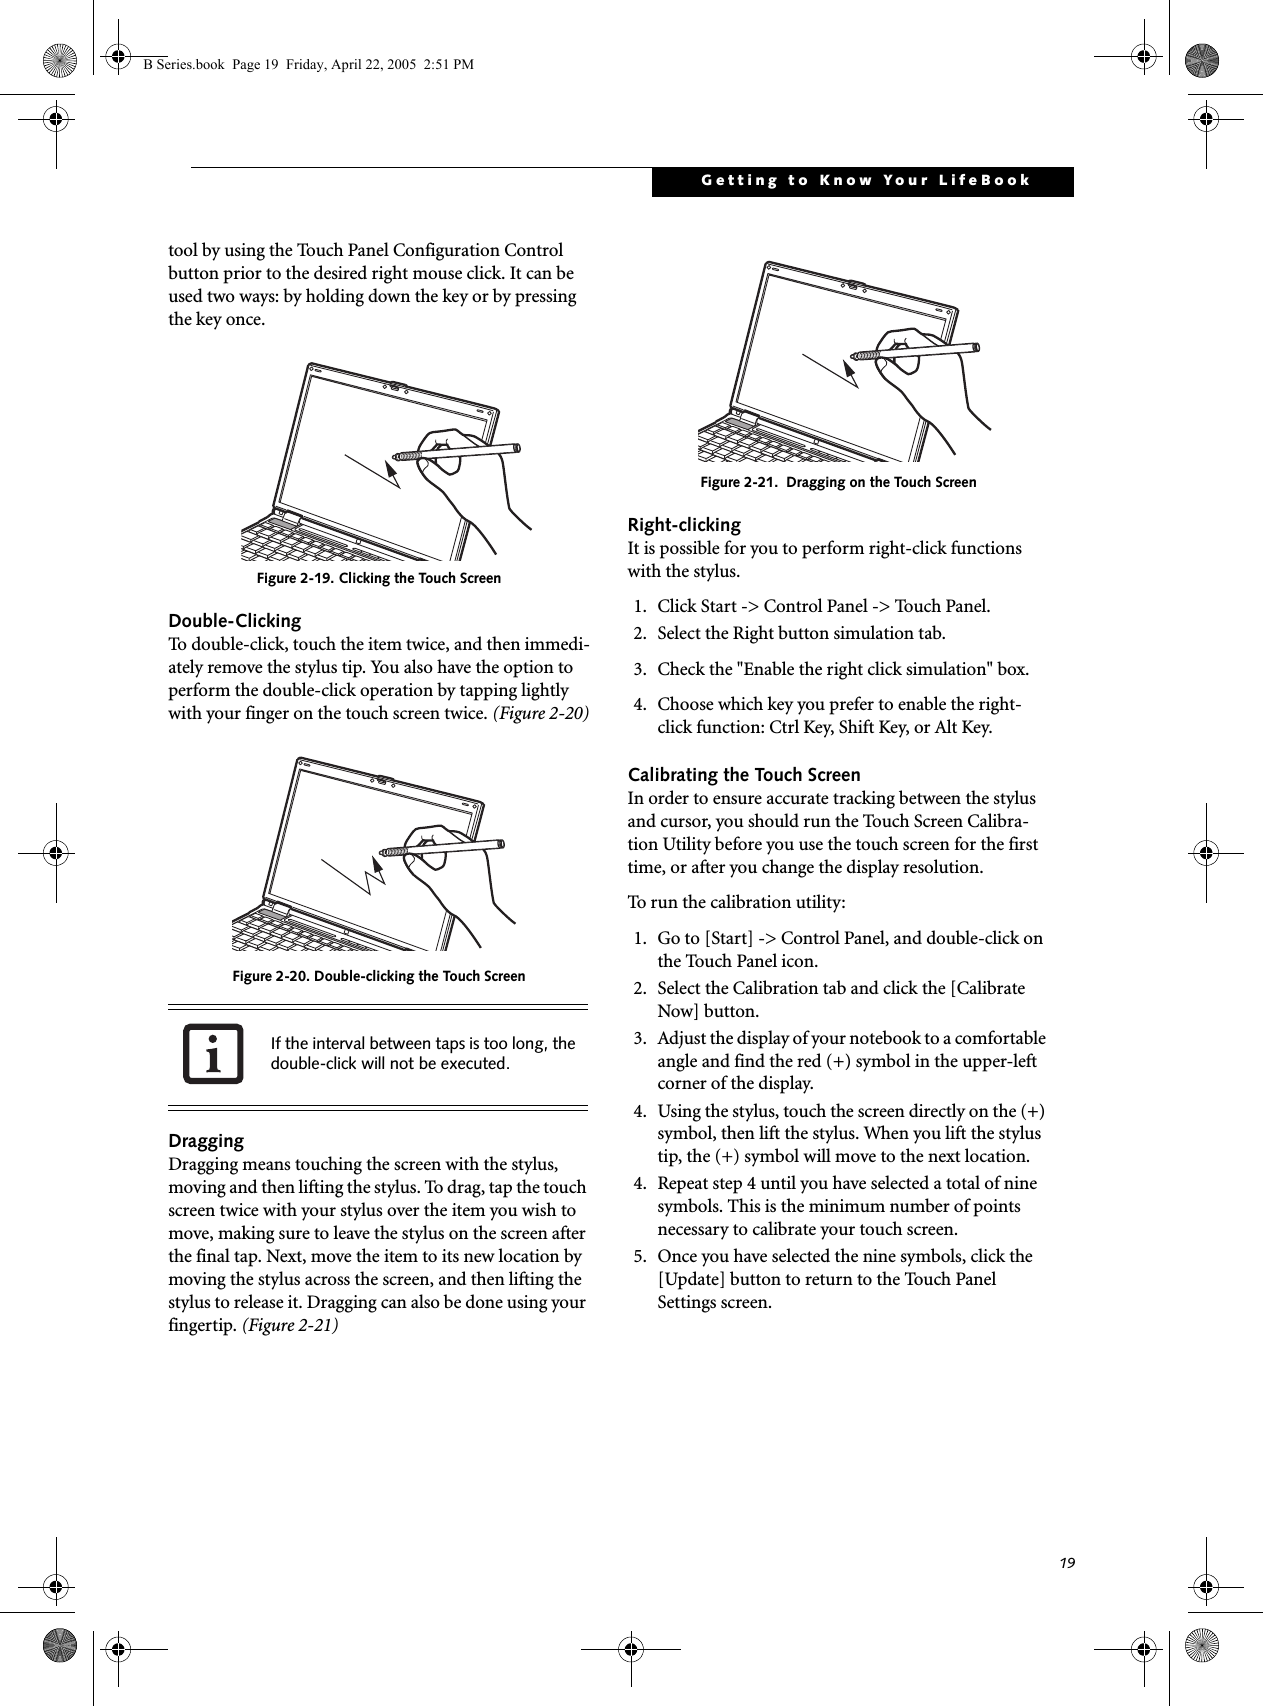 19Getting to Know Your LifeBooktool by using the Touch Panel Configuration Control button prior to the desired right mouse click. It can be used two ways: by holding down the key or by pressing the key once.Figure 2-19. Clicking the Touch ScreenDouble-ClickingTo double-click, touch the item twice, and then immedi-ately remove the stylus tip. You also have the option to perform the double-click operation by tapping lightly with your finger on the touch screen twice. (Figure 2-20)Figure 2-20. Double-clicking the Touch ScreenDraggingDragging means touching the screen with the stylus, moving and then lifting the stylus. To drag, tap the touch screen twice with your stylus over the item you wish to move, making sure to leave the stylus on the screen after the final tap. Next, move the item to its new location by moving the stylus across the screen, and then lifting the stylus to release it. Dragging can also be done using your fingertip. (Figure 2-21)Figure 2-21.  Dragging on the Touch ScreenRight-clickingIt is possible for you to perform right-click functions with the stylus.1. Click Start -&gt; Control Panel -&gt; Touch Panel.2. Select the Right button simulation tab. 3. Check the &quot;Enable the right click simulation&quot; box.4. Choose which key you prefer to enable the right-click function: Ctrl Key, Shift Key, or Alt Key.Calibrating the Touch ScreenIn order to ensure accurate tracking between the stylus and cursor, you should run the Touch Screen Calibra-tion Utility before you use the touch screen for the first time, or after you change the display resolution.To run the calibration utility:1. Go to [Start] -&gt; Control Panel, and double-click on the Touch Panel icon. 2. Select the Calibration tab and click the [Calibrate Now] button. 3. Adjust the display of your notebook to a comfortable angle and find the red (+) symbol in the upper-left corner of the display.4. Using the stylus, touch the screen directly on the (+) symbol, then lift the stylus. When you lift the stylus tip, the (+) symbol will move to the next location.4. Repeat step 4 until you have selected a total of nine symbols. This is the minimum number of points necessary to calibrate your touch screen.5. Once you have selected the nine symbols, click the [Update] button to return to the Touch Panel Settings screen.If the interval between taps is too long, thedouble-click will not be executed.B Series.book  Page 19  Friday, April 22, 2005  2:51 PM